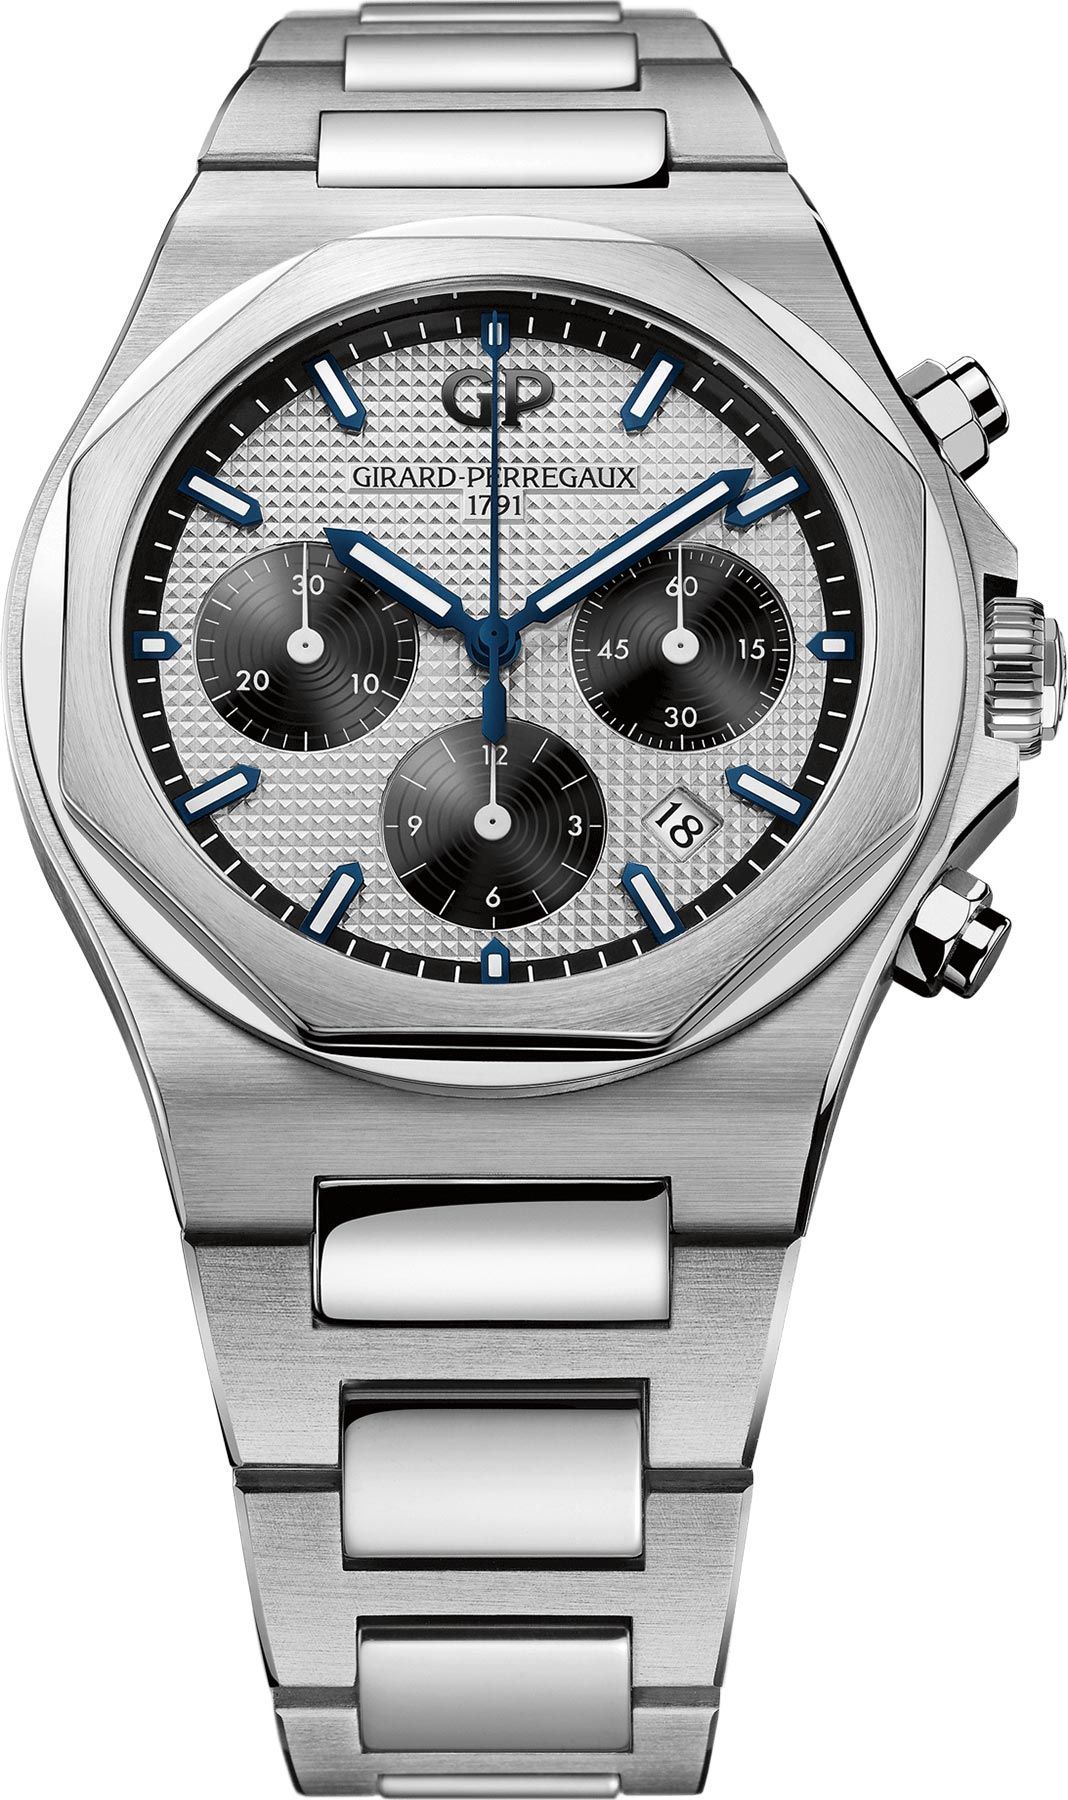 Girard-Perregaux Chronograph 42 mm Watch in Silver Dial For Men - 1